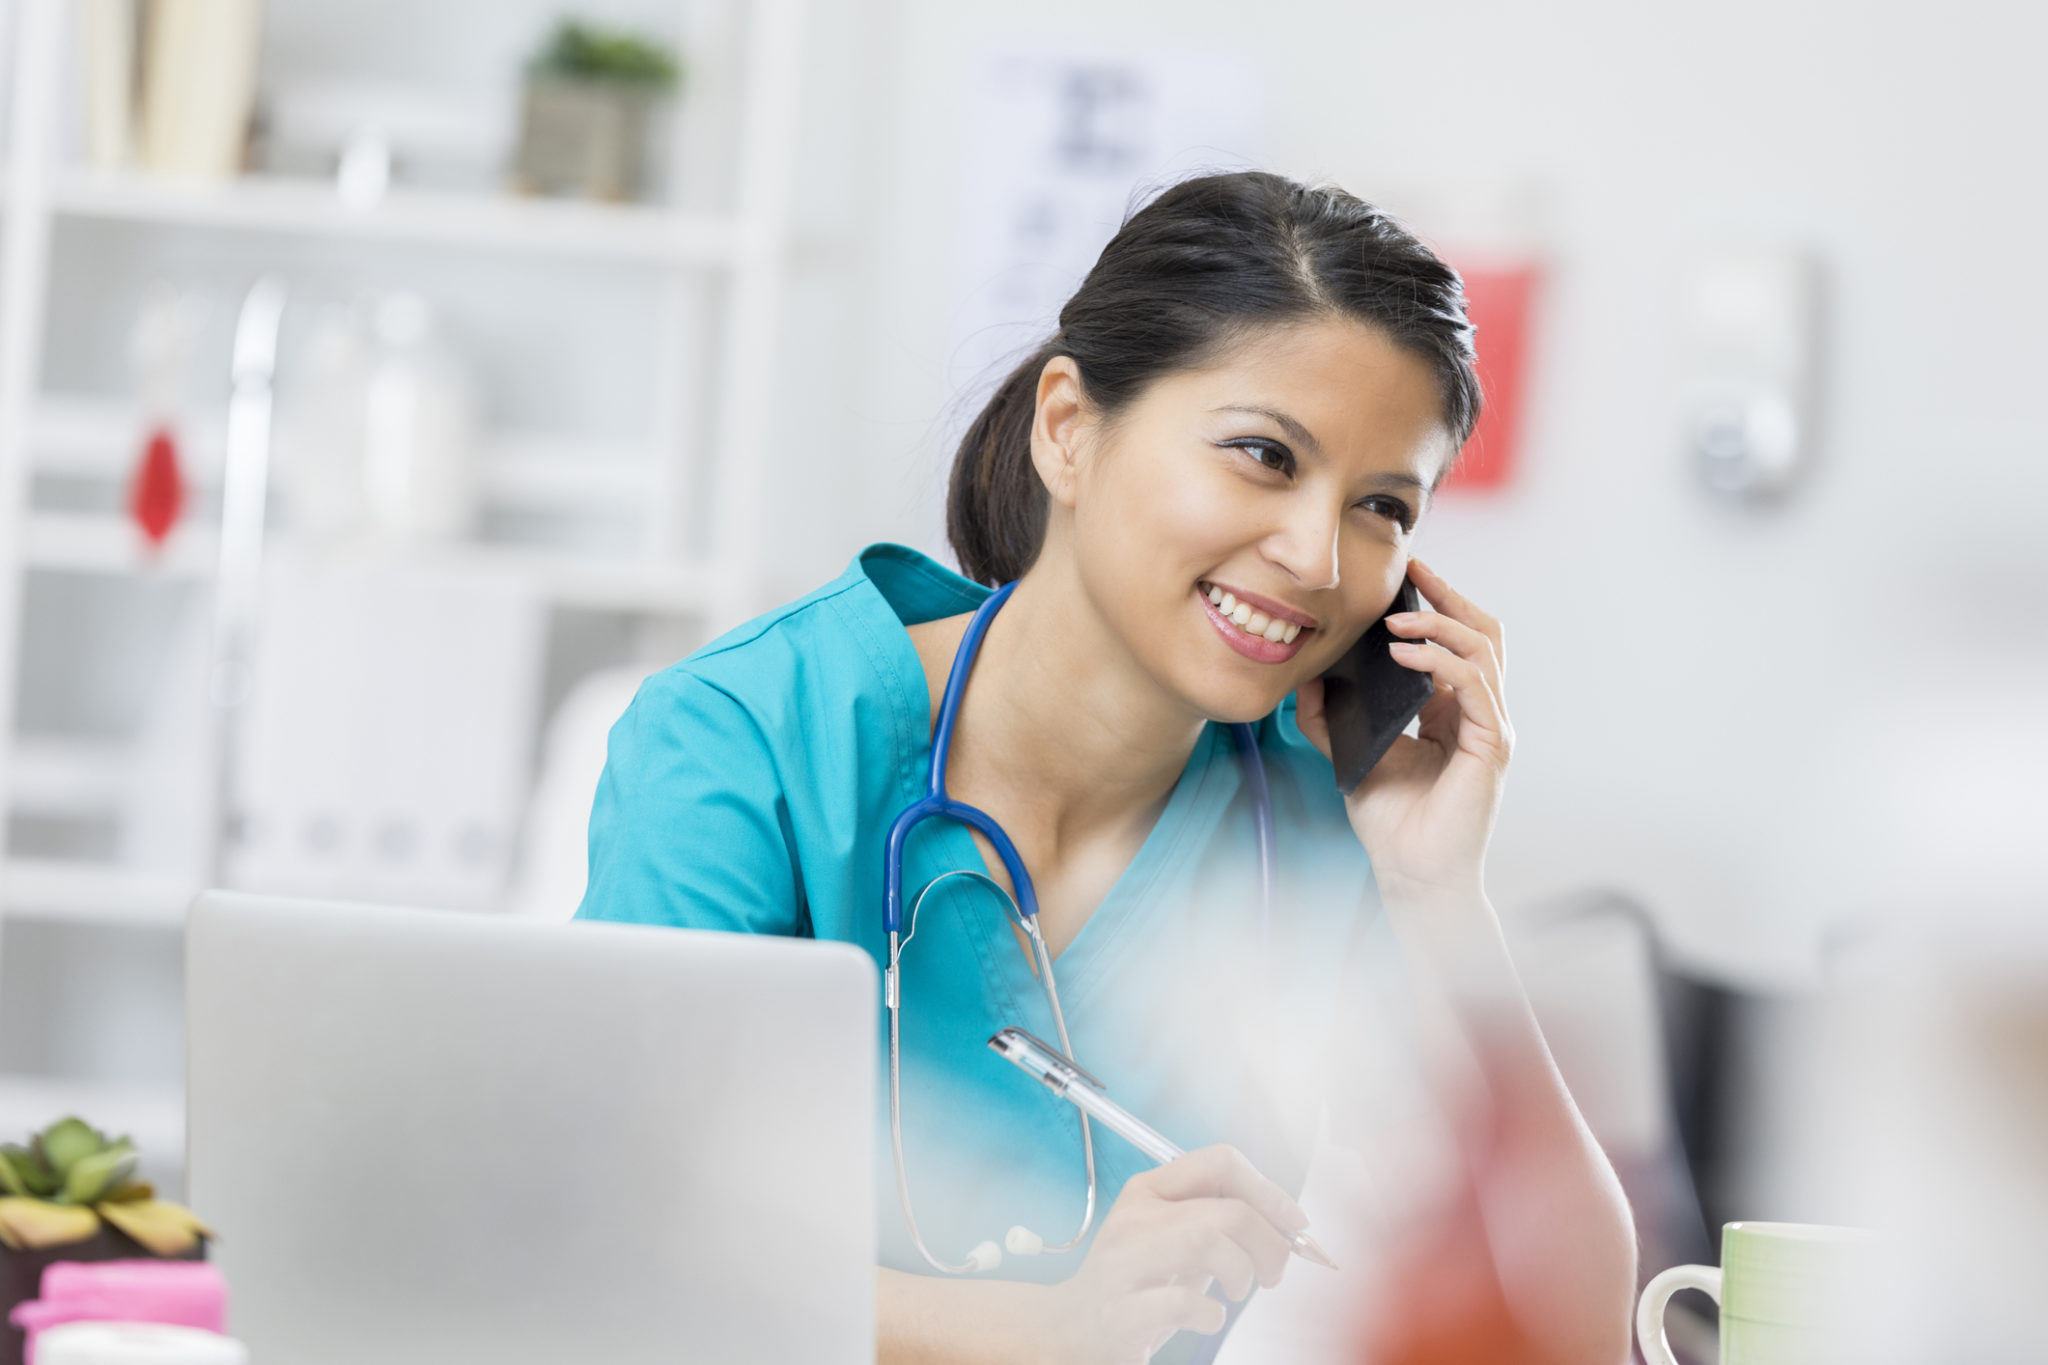 Smiling mid adult Asian nurse or doctor is on the phone with a patient. An open laptop is on the desk.